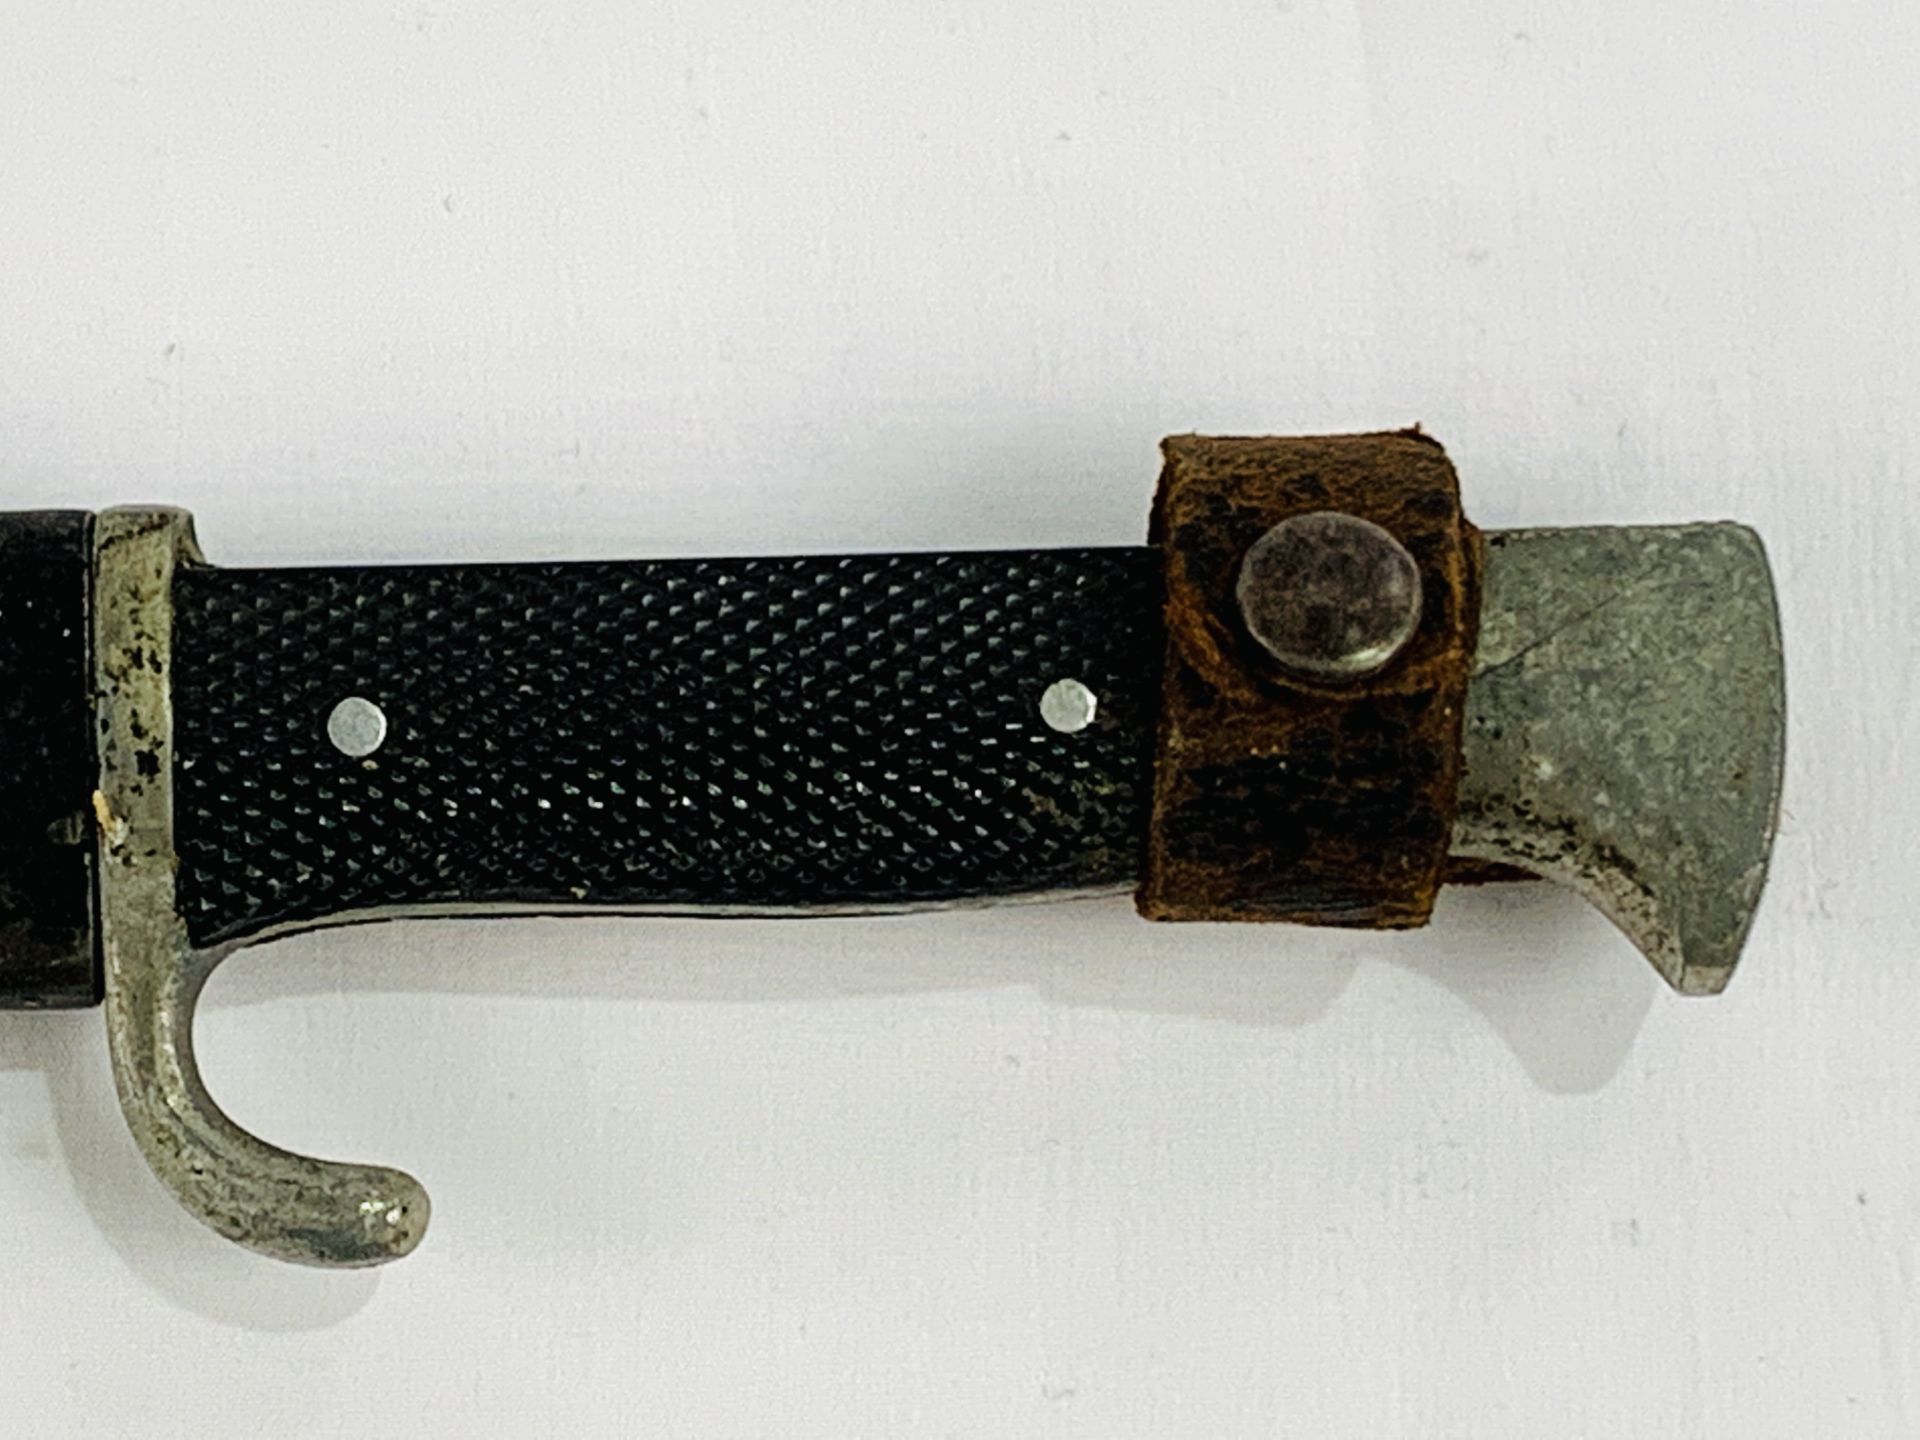 German Third Reich Hitler Youth pattern sheath knife, 1938 - Image 5 of 6